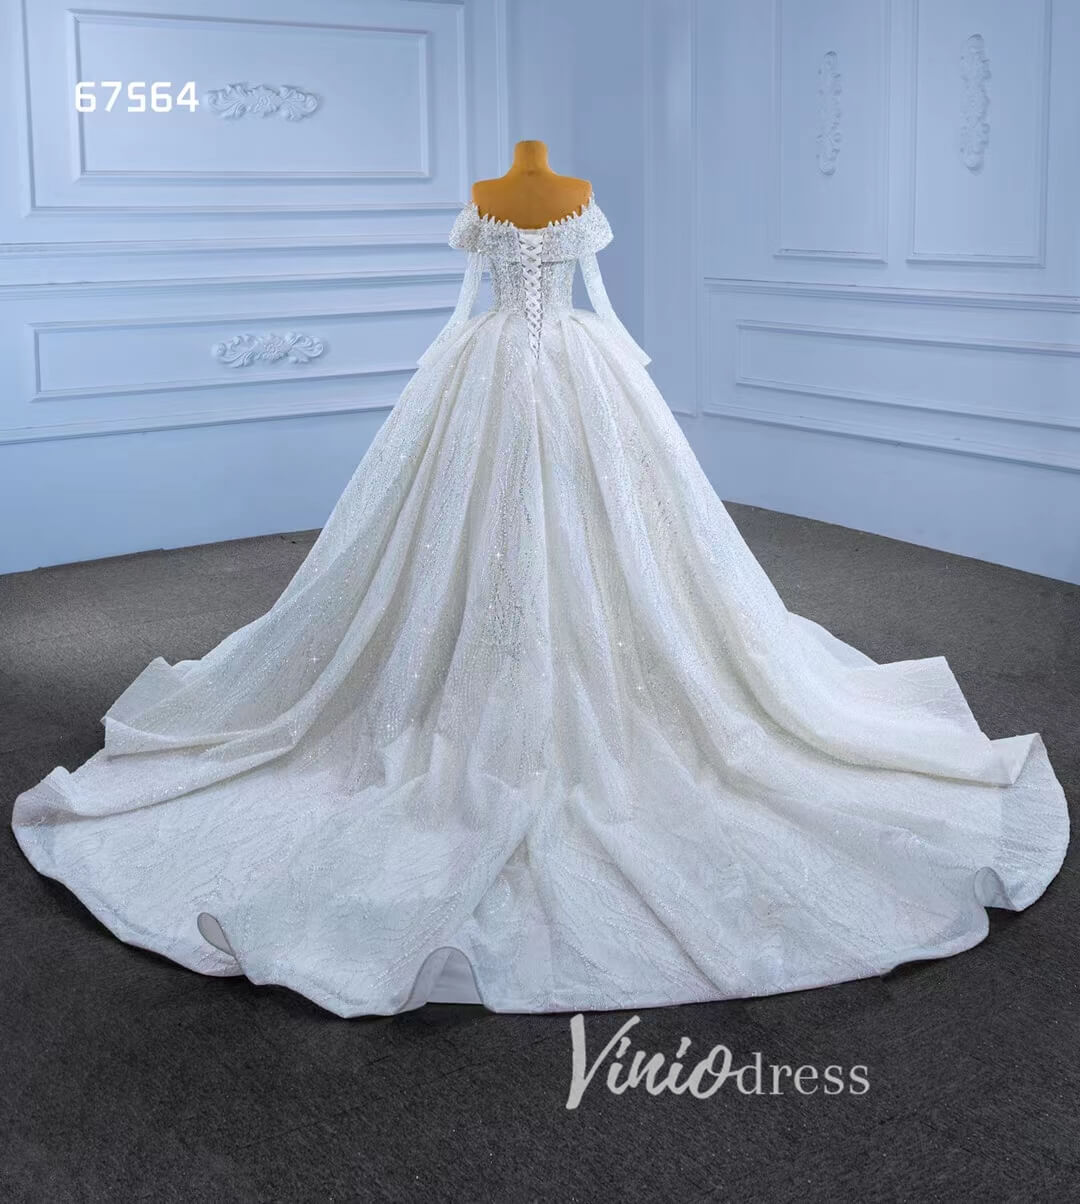 Luxury Beaded Ball Gown Wedding Dresses with Sleeves 67564-wedding dresses-Viniodress-Viniodress